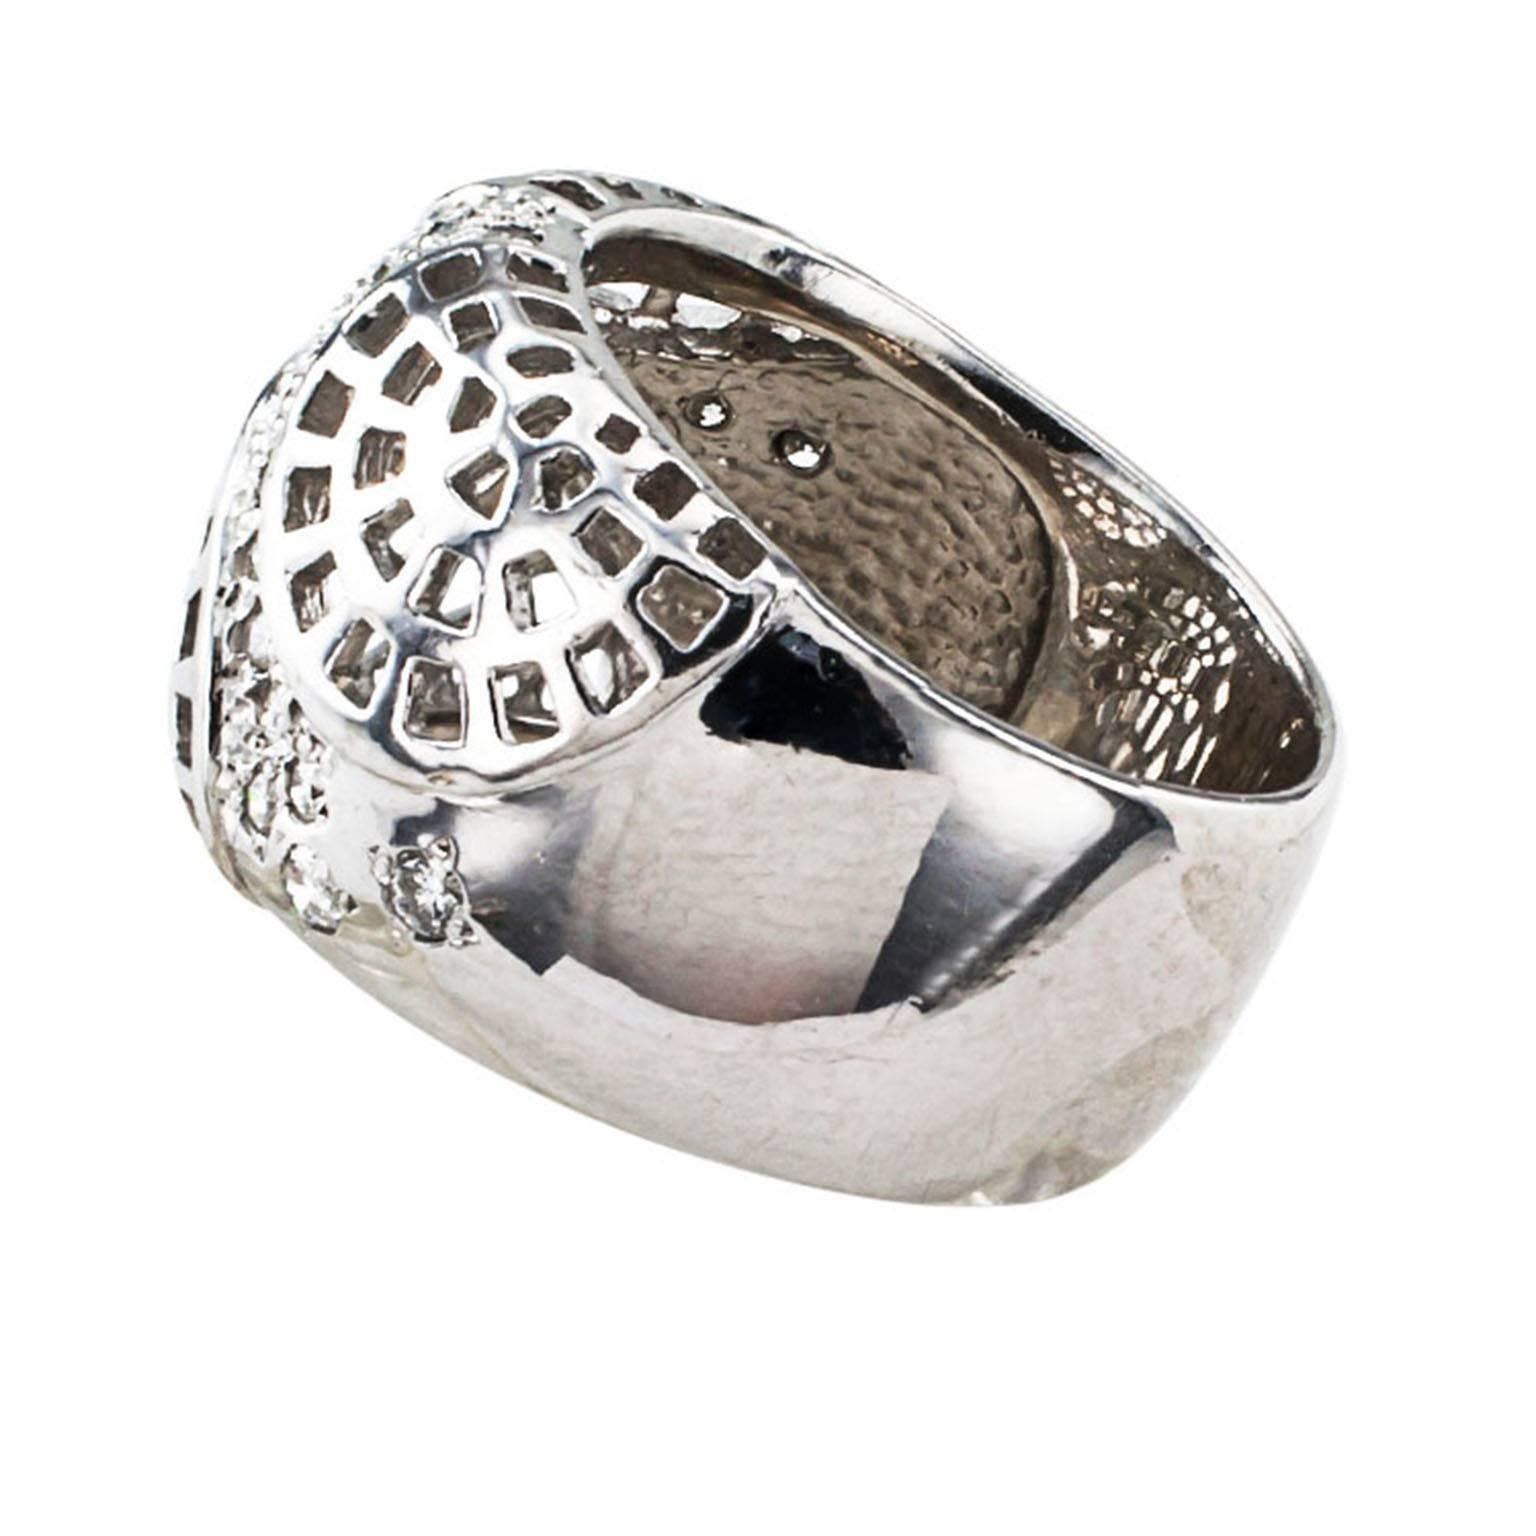 Futuristic Platinum and Diamond Wide Ring Band

It is different, makes a statement, with futuristic and abstract graduating semicircular honeycomb like motifs connected via a plane pave-set with round brilliant-cut diamonds decorate the top